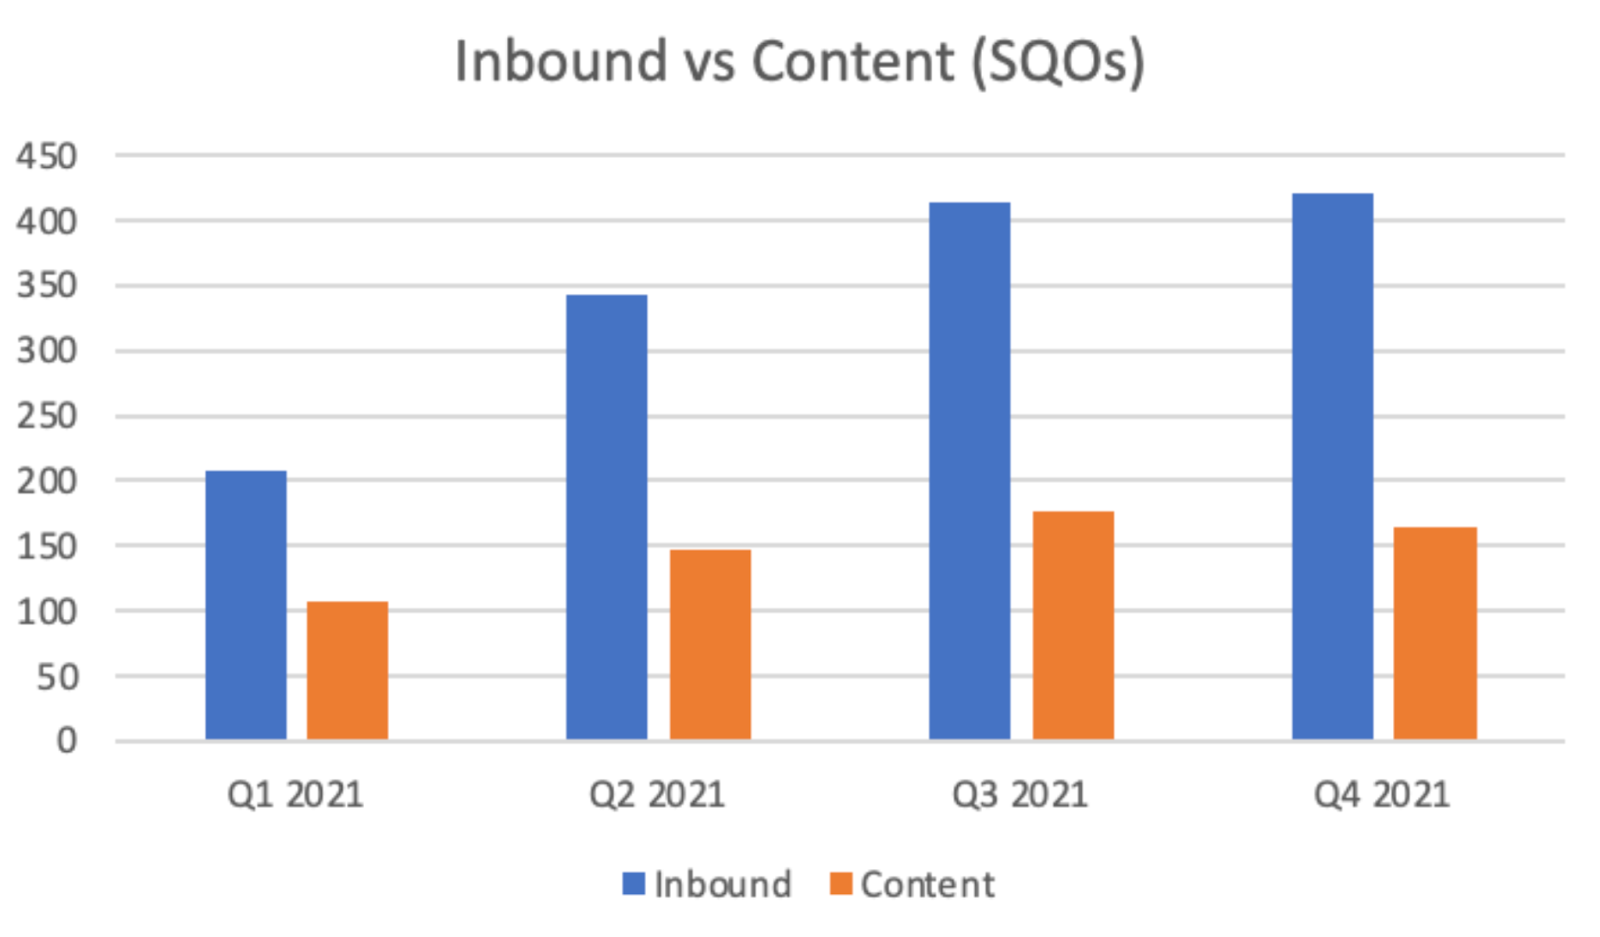 Graph showing Cognism's inbound vs content SQOs in 2021